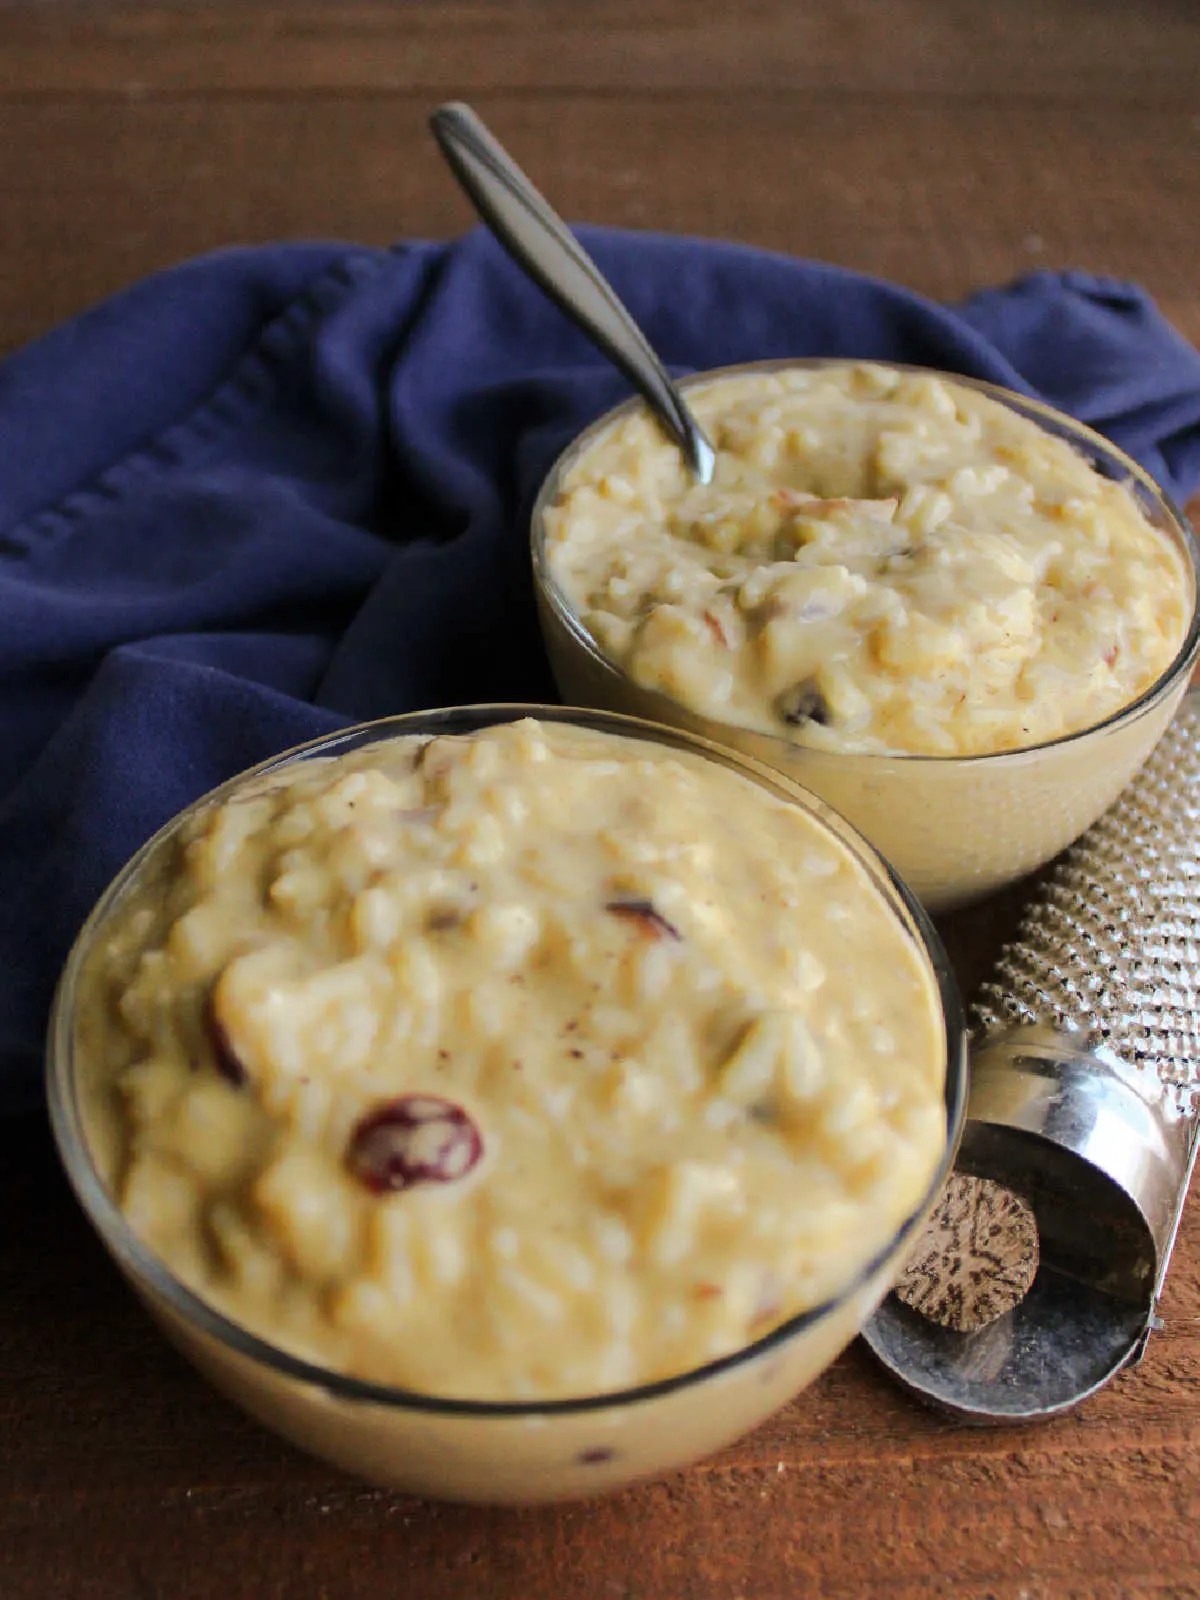 Close up of two small bowls of rice pudding showing creamy texture with rice and dried cranberries inside.